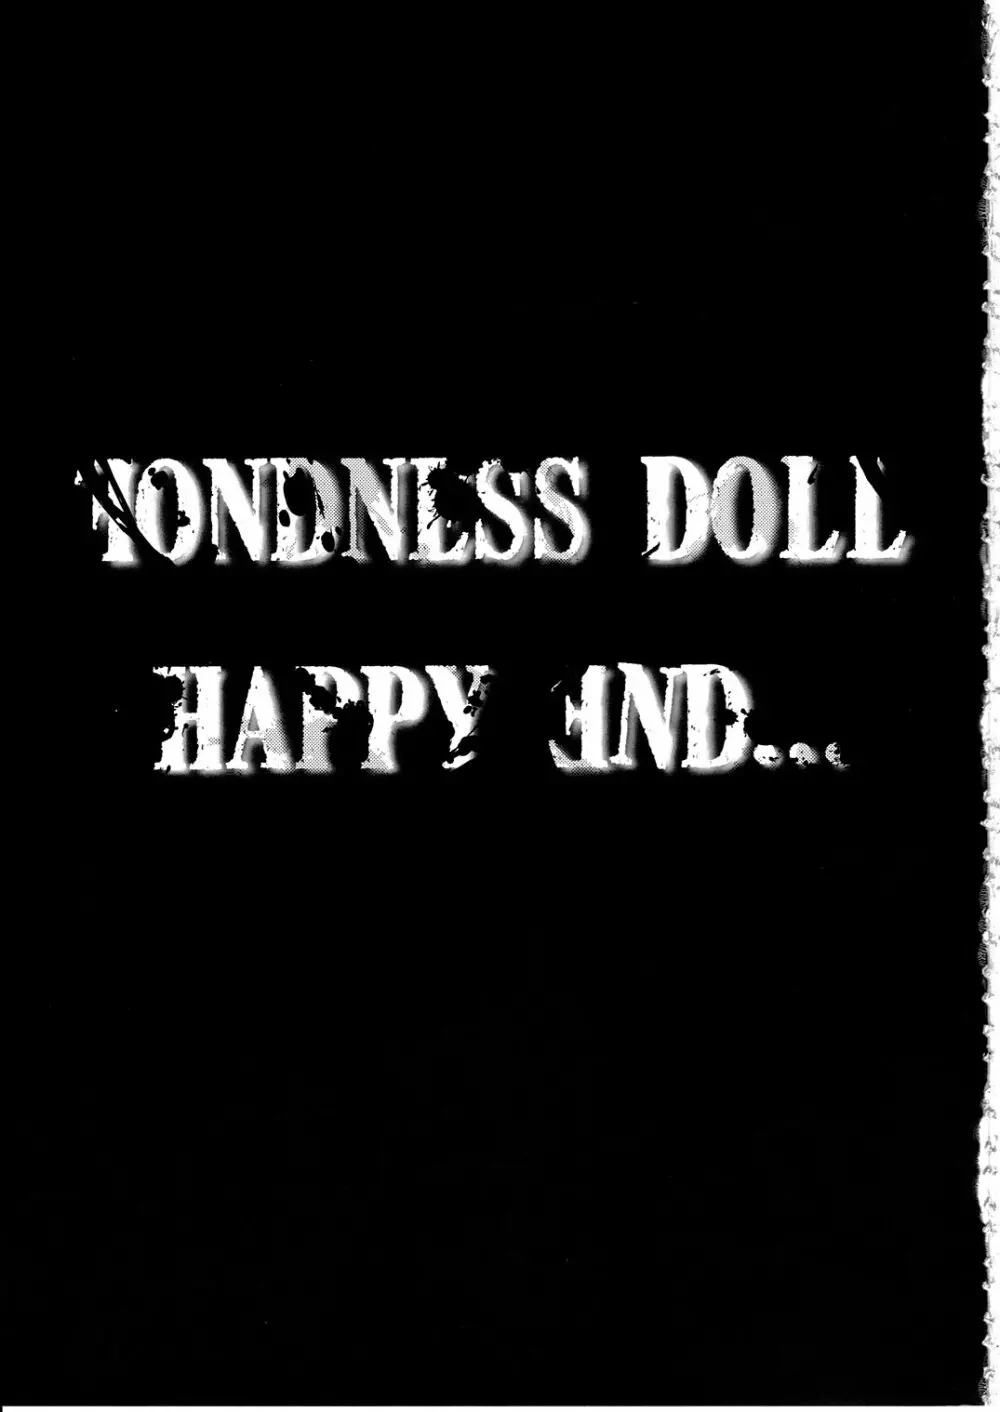 Fondness Doll Happy END Page.50